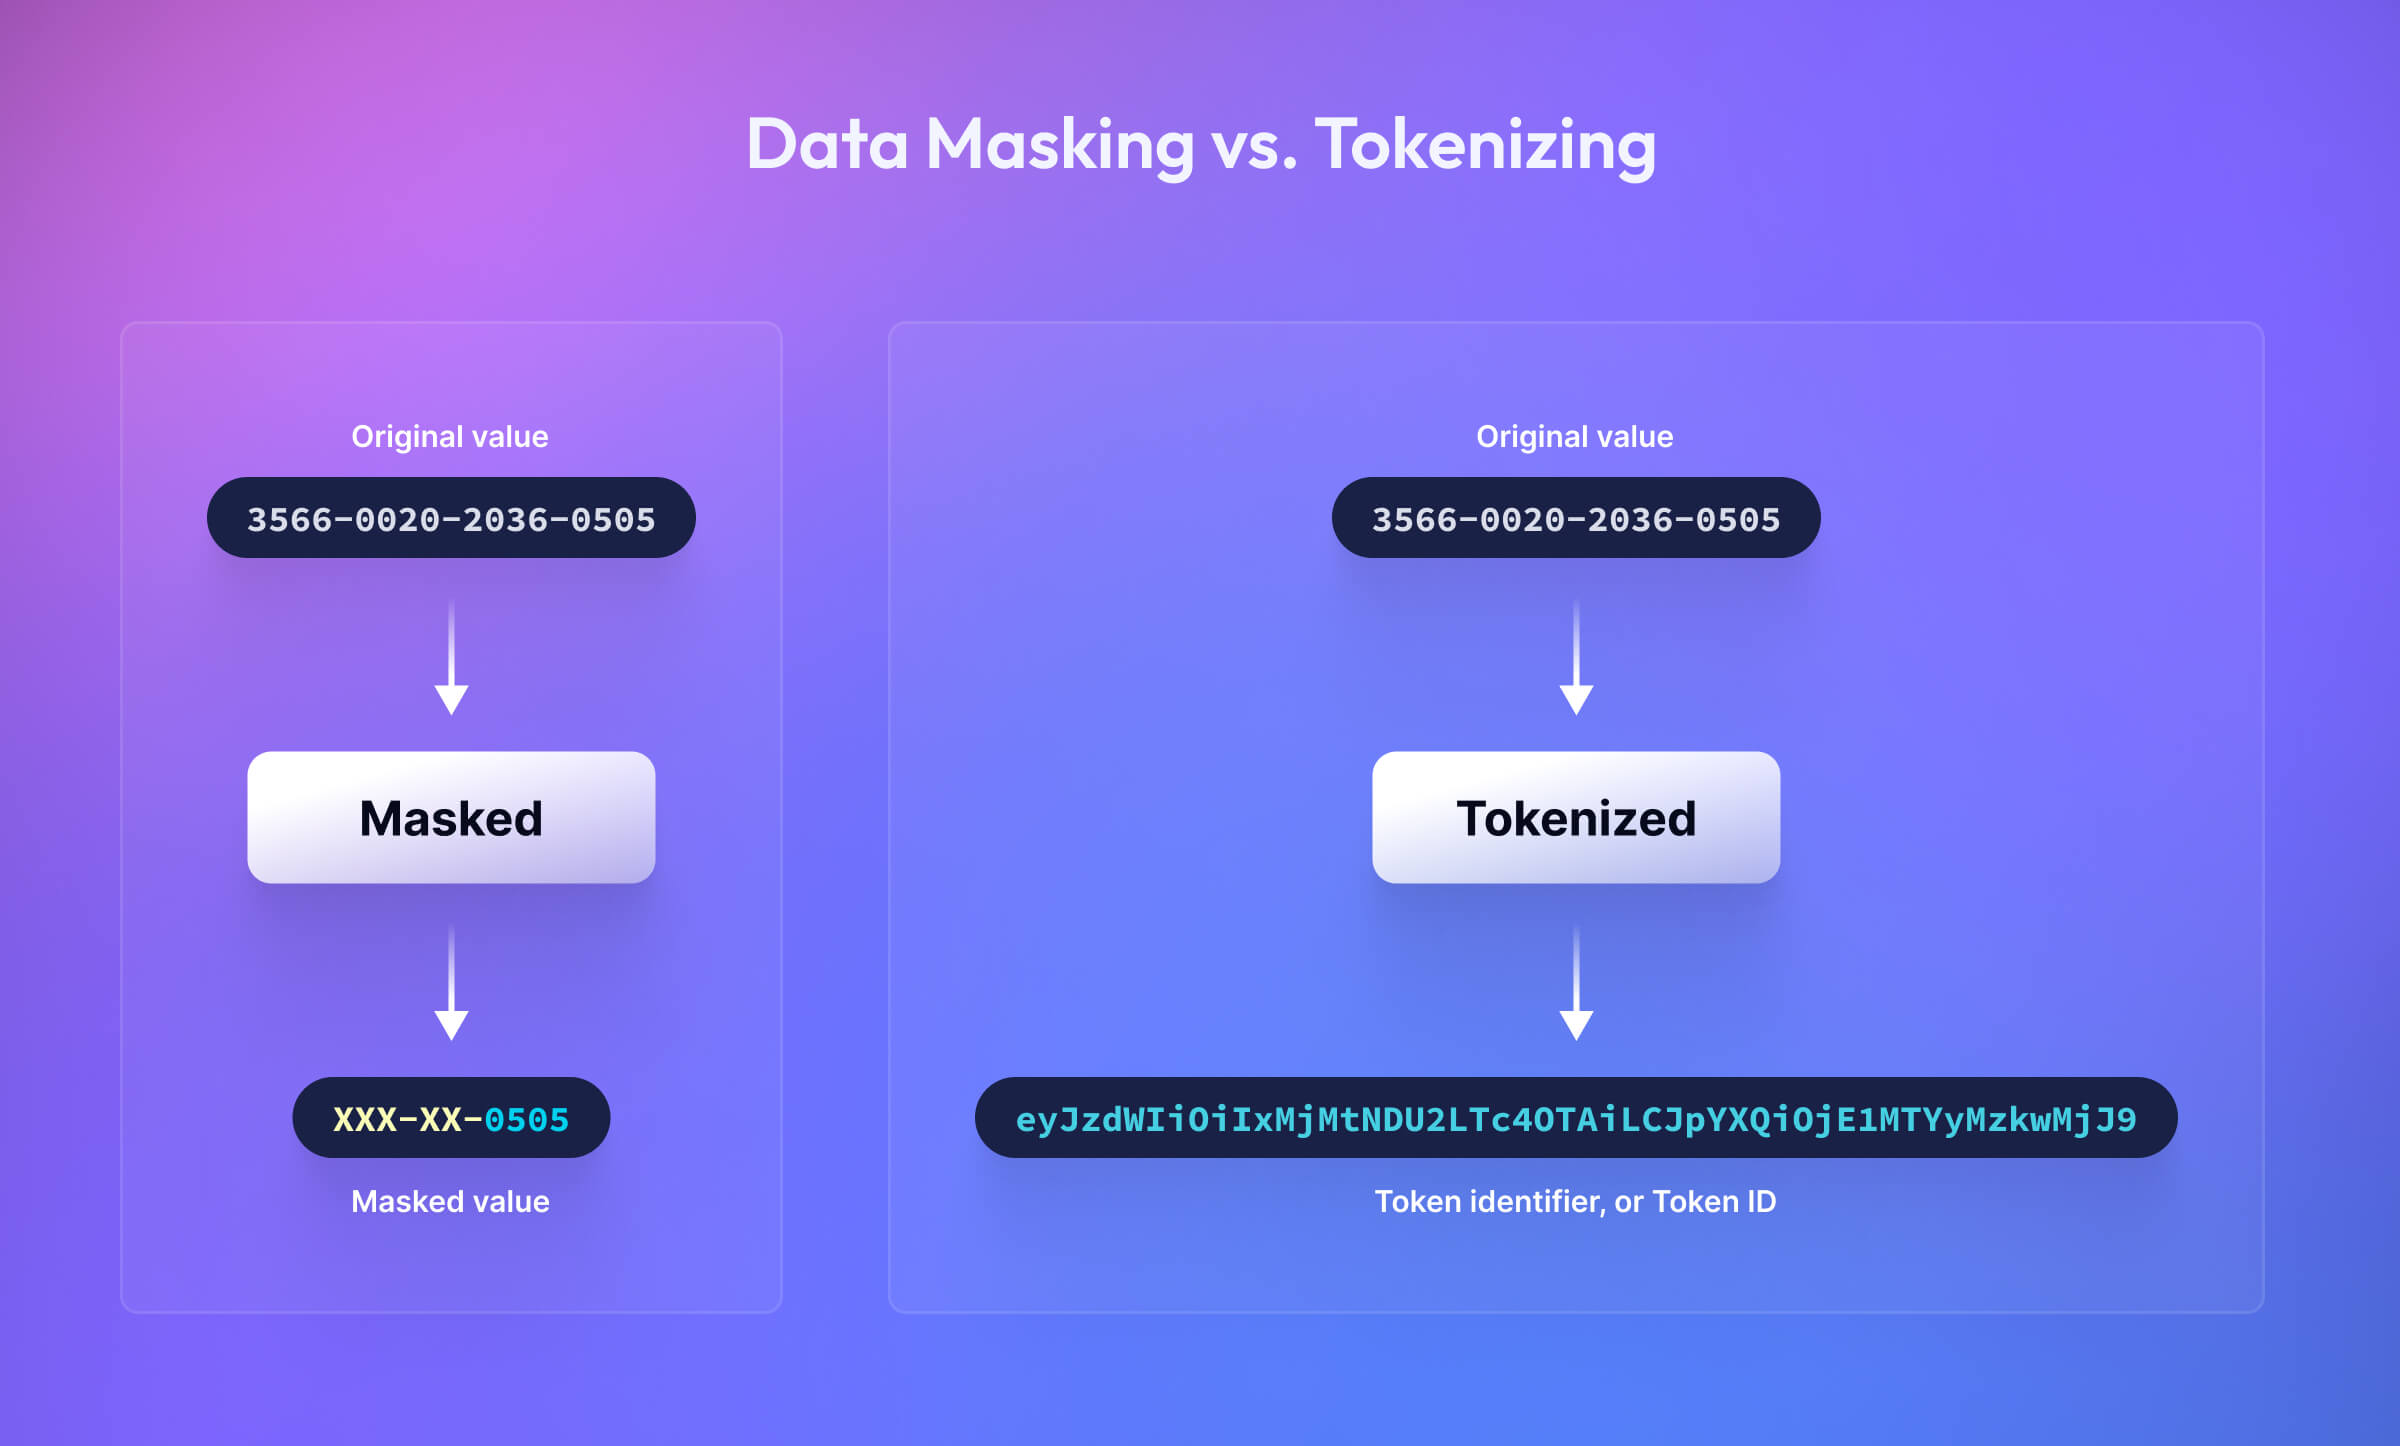 Masking takes a string and obfuscates an original raw value while tokenizing create a new value in the form of a token. 